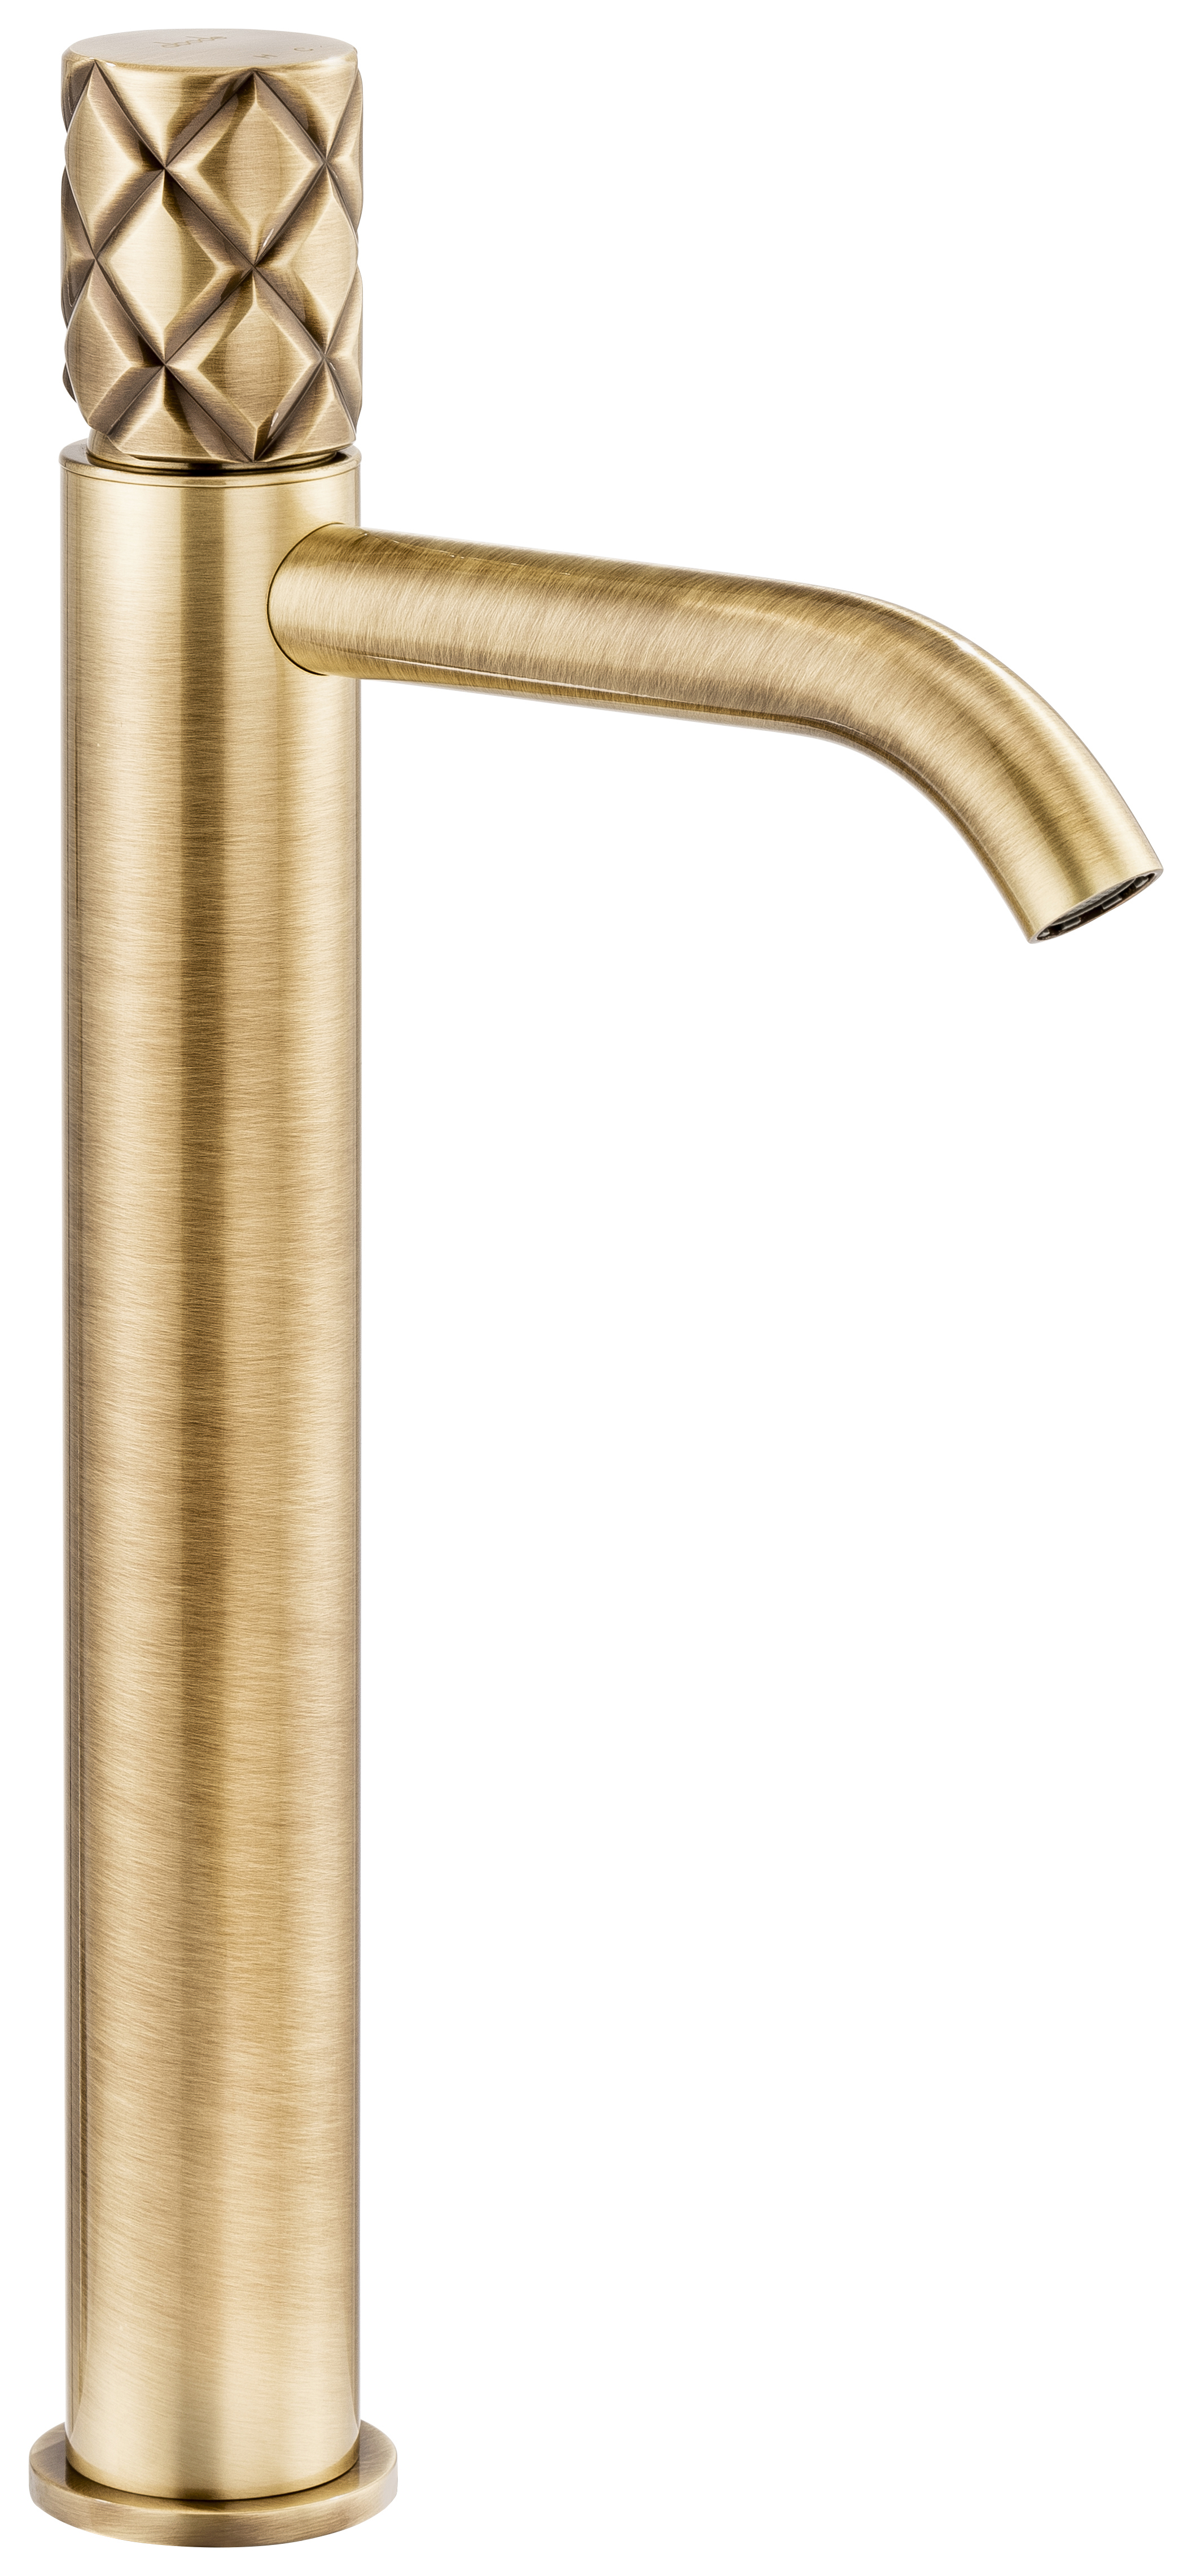 Image of Abode Kite Tall Basin Mixer Tap - Antique Brass